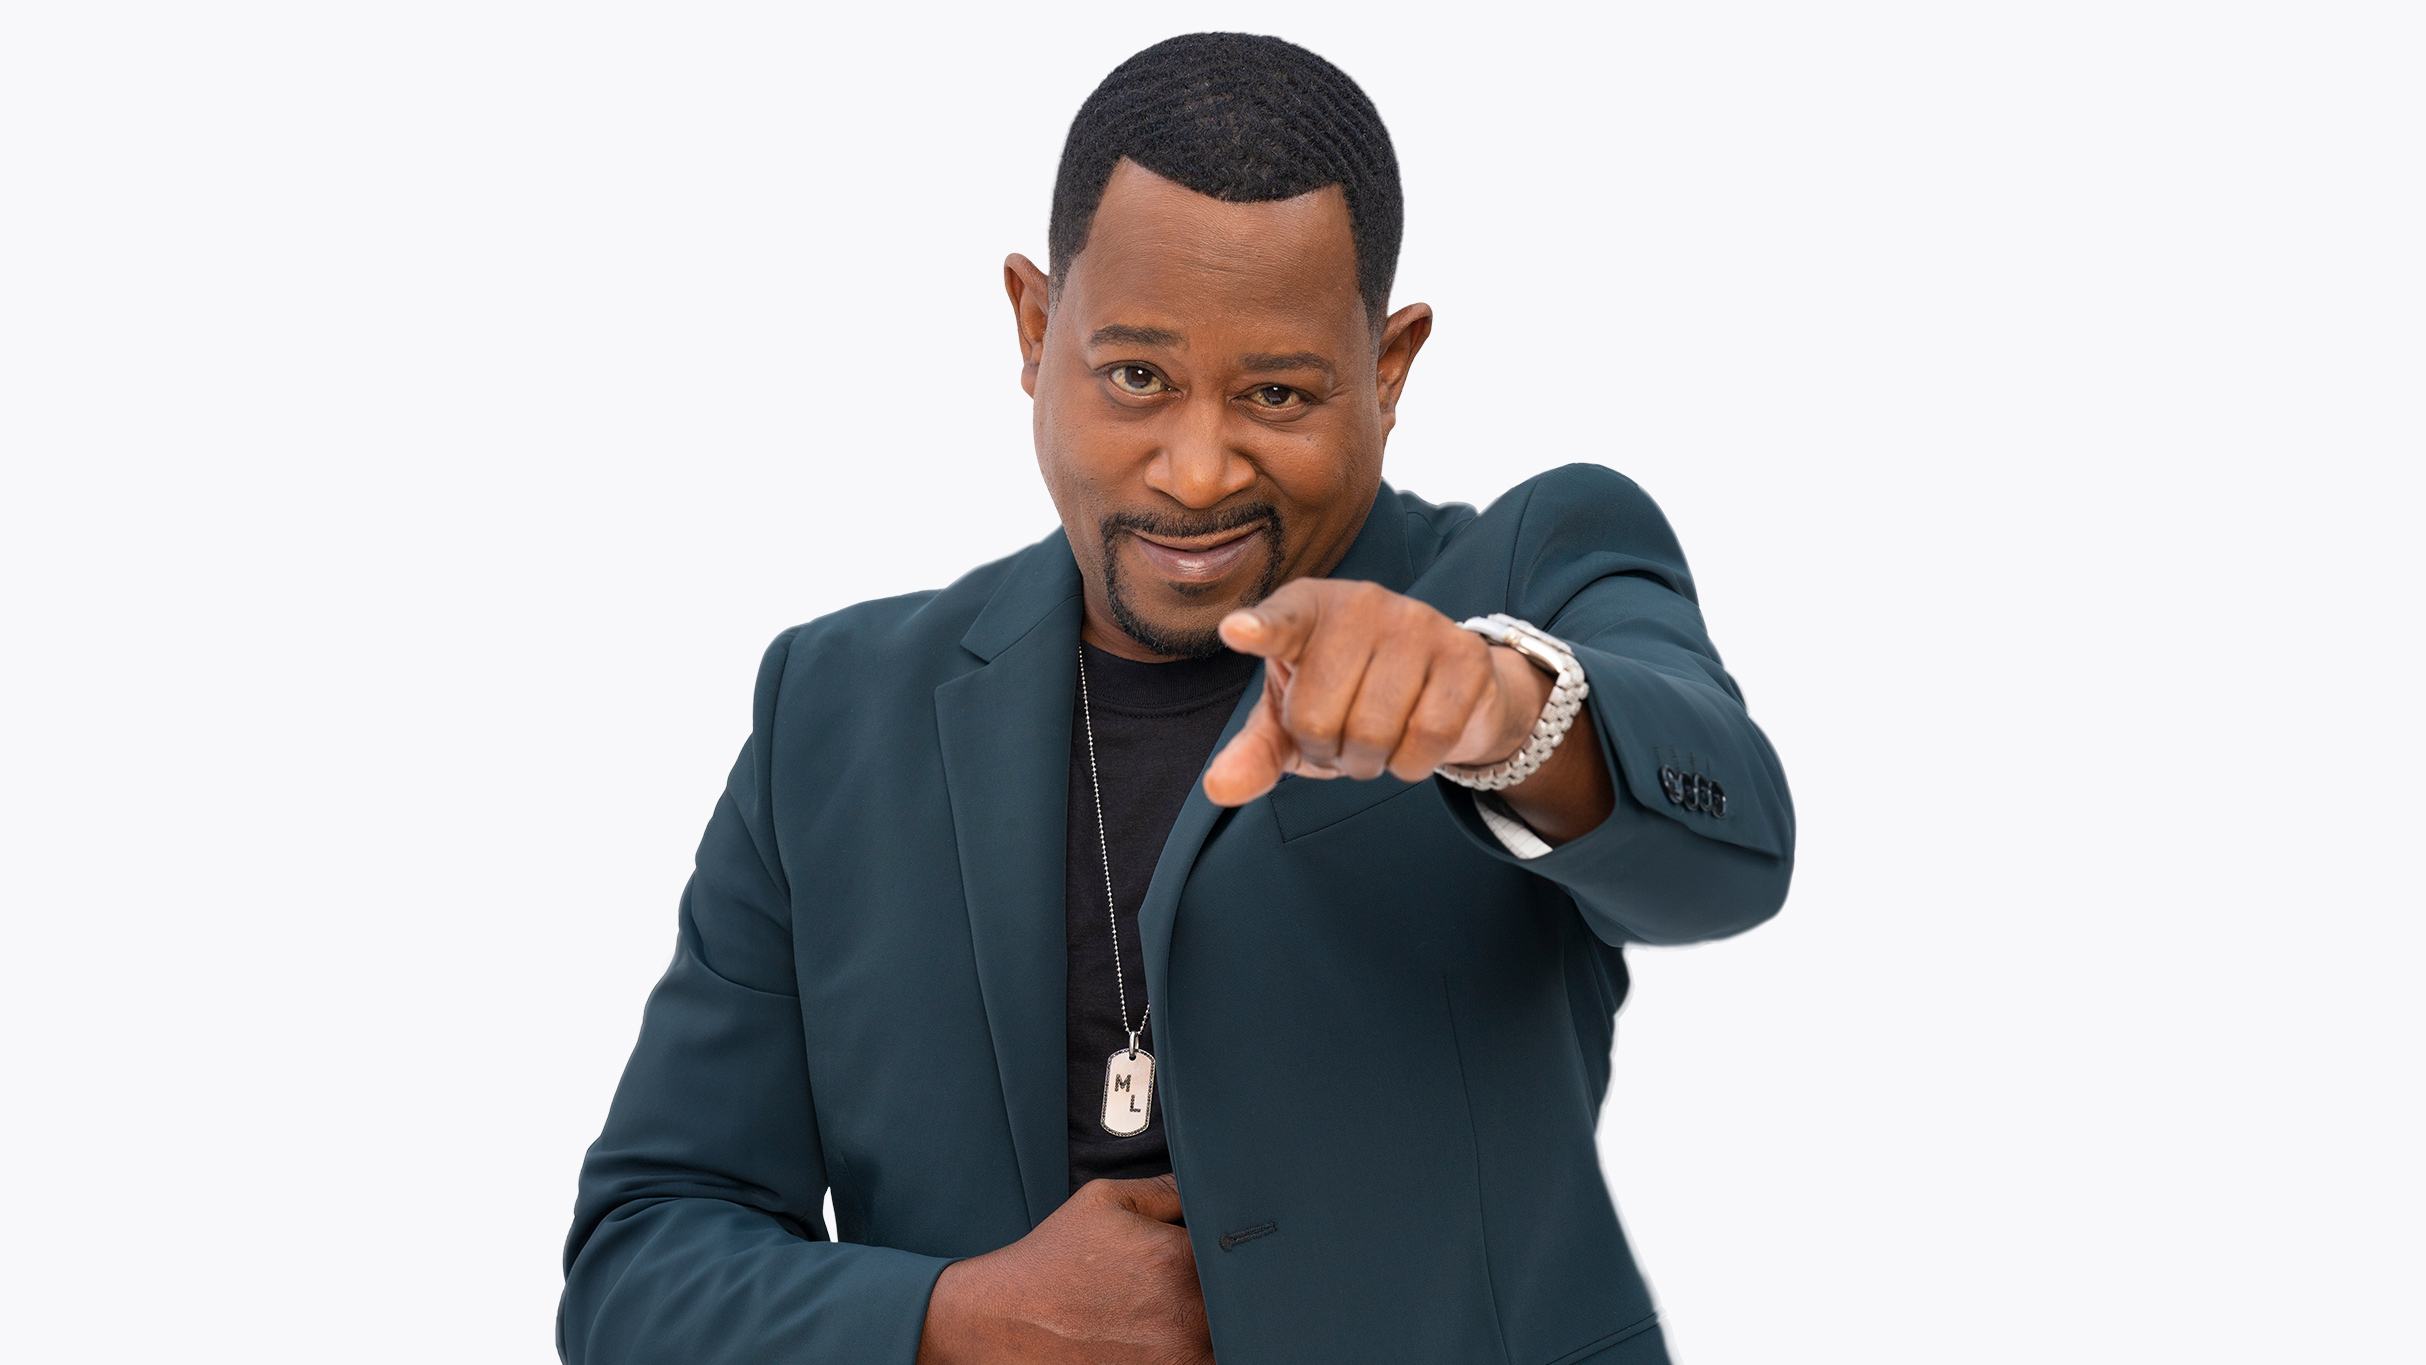 Martin Lawrence with special guest Gary Owen & B.Simone